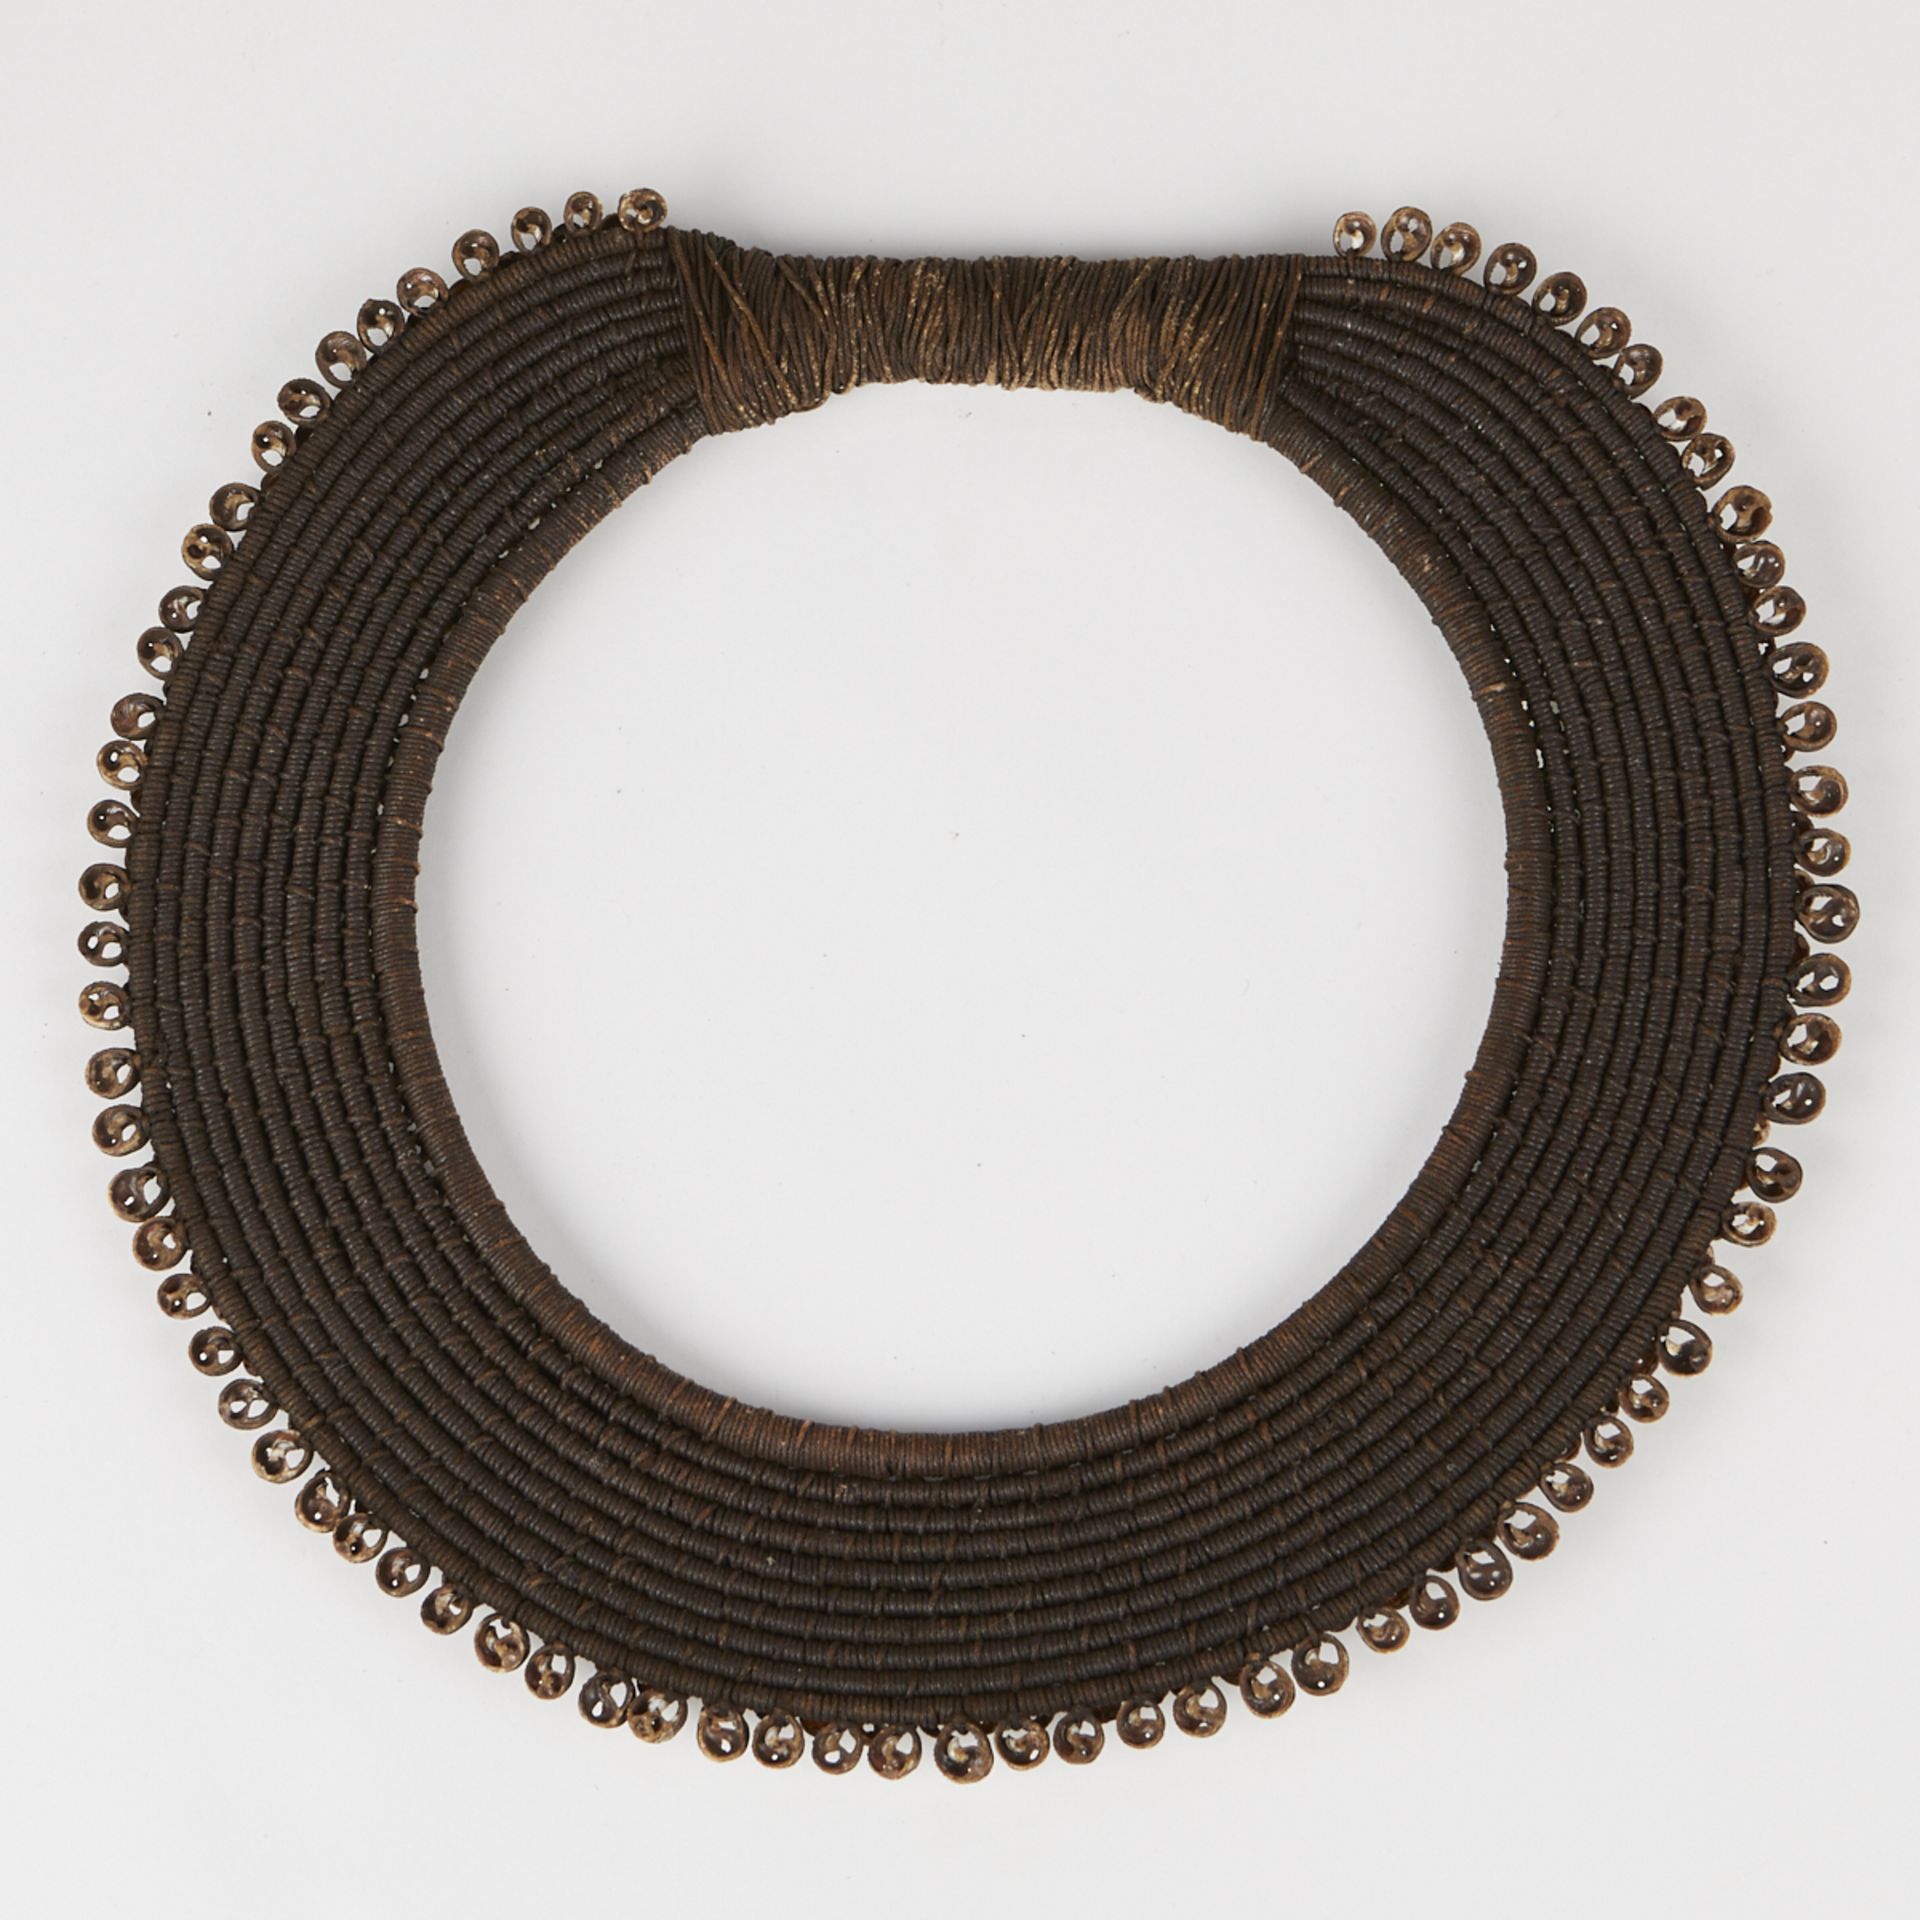 3 Collar Necklaces - 2 African and 1 New Guinea - Image 5 of 10